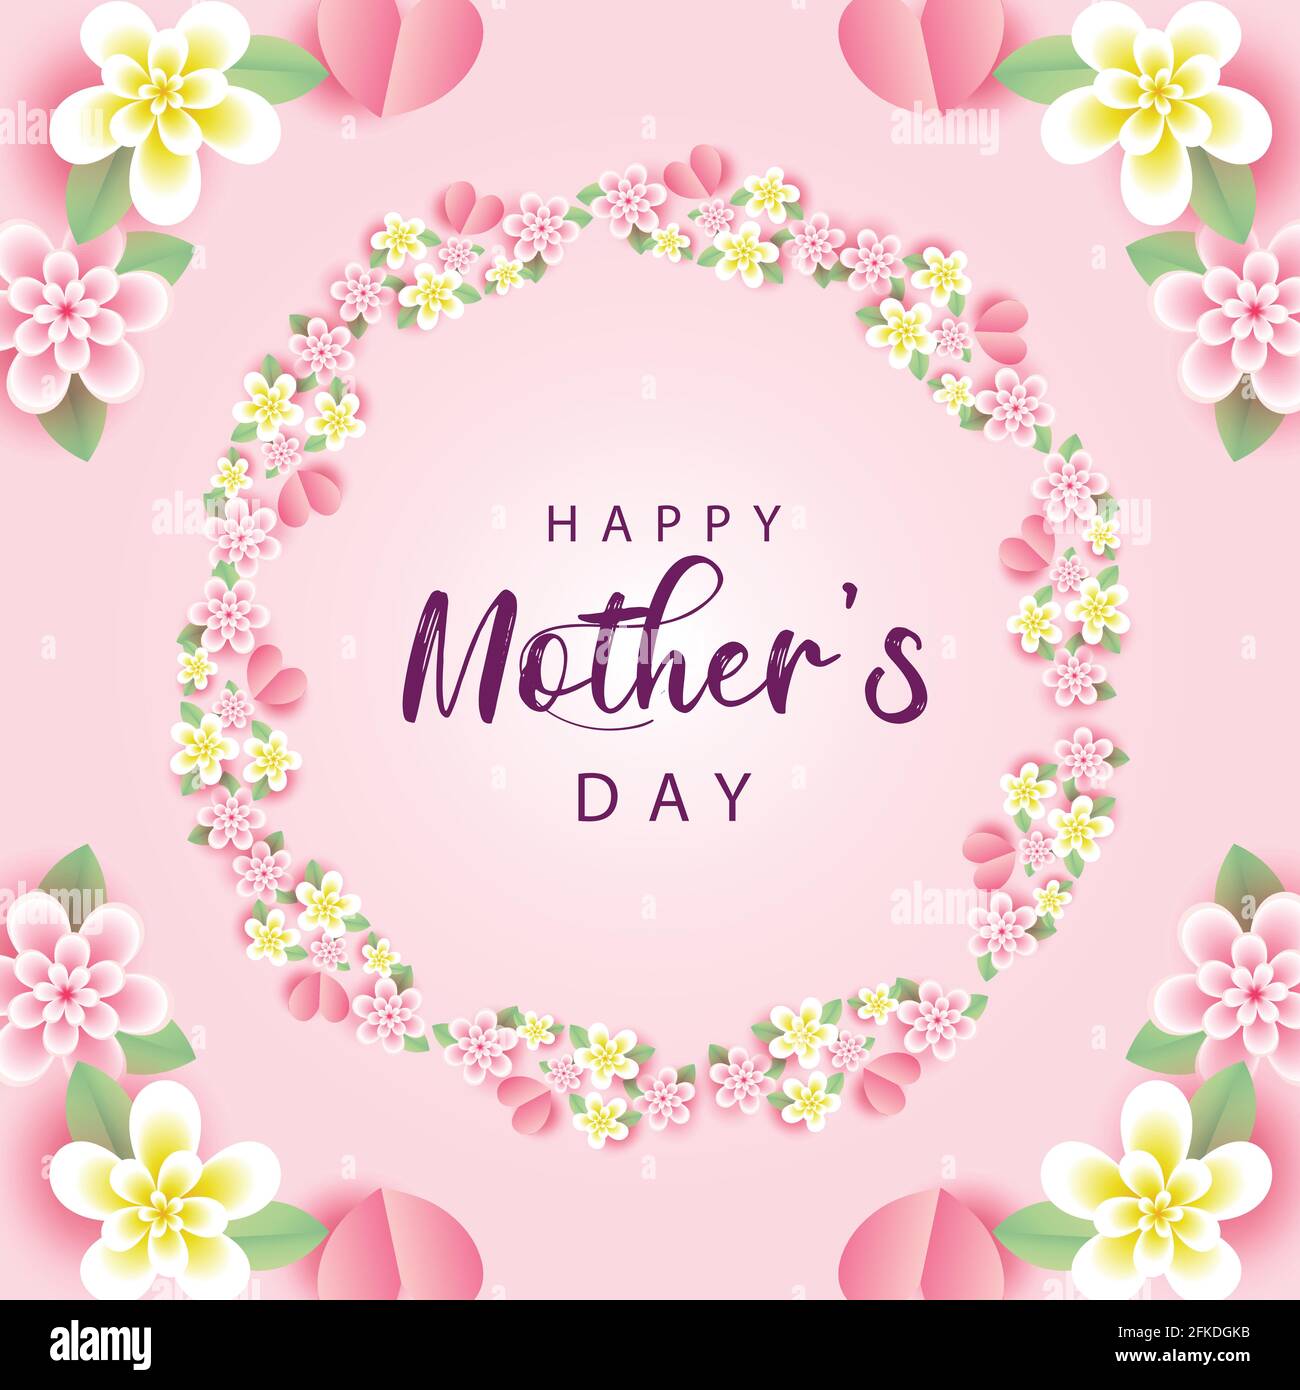 Happy Mothers Day greeting card poster vector with 3d realistic ...